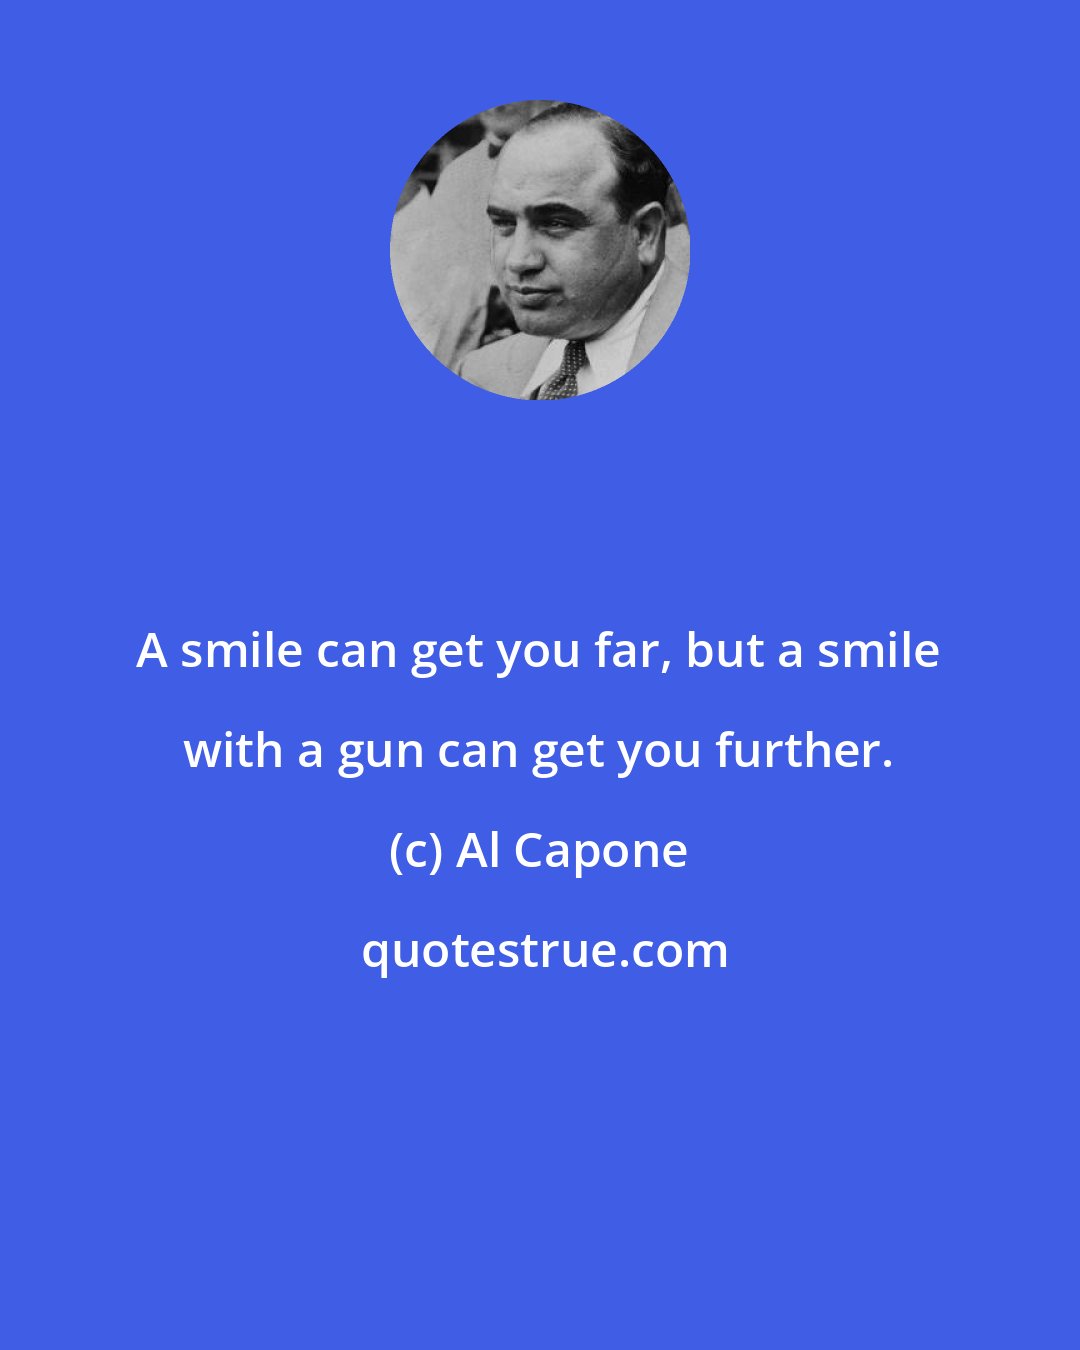 Al Capone: A smile can get you far, but a smile with a gun can get you further.